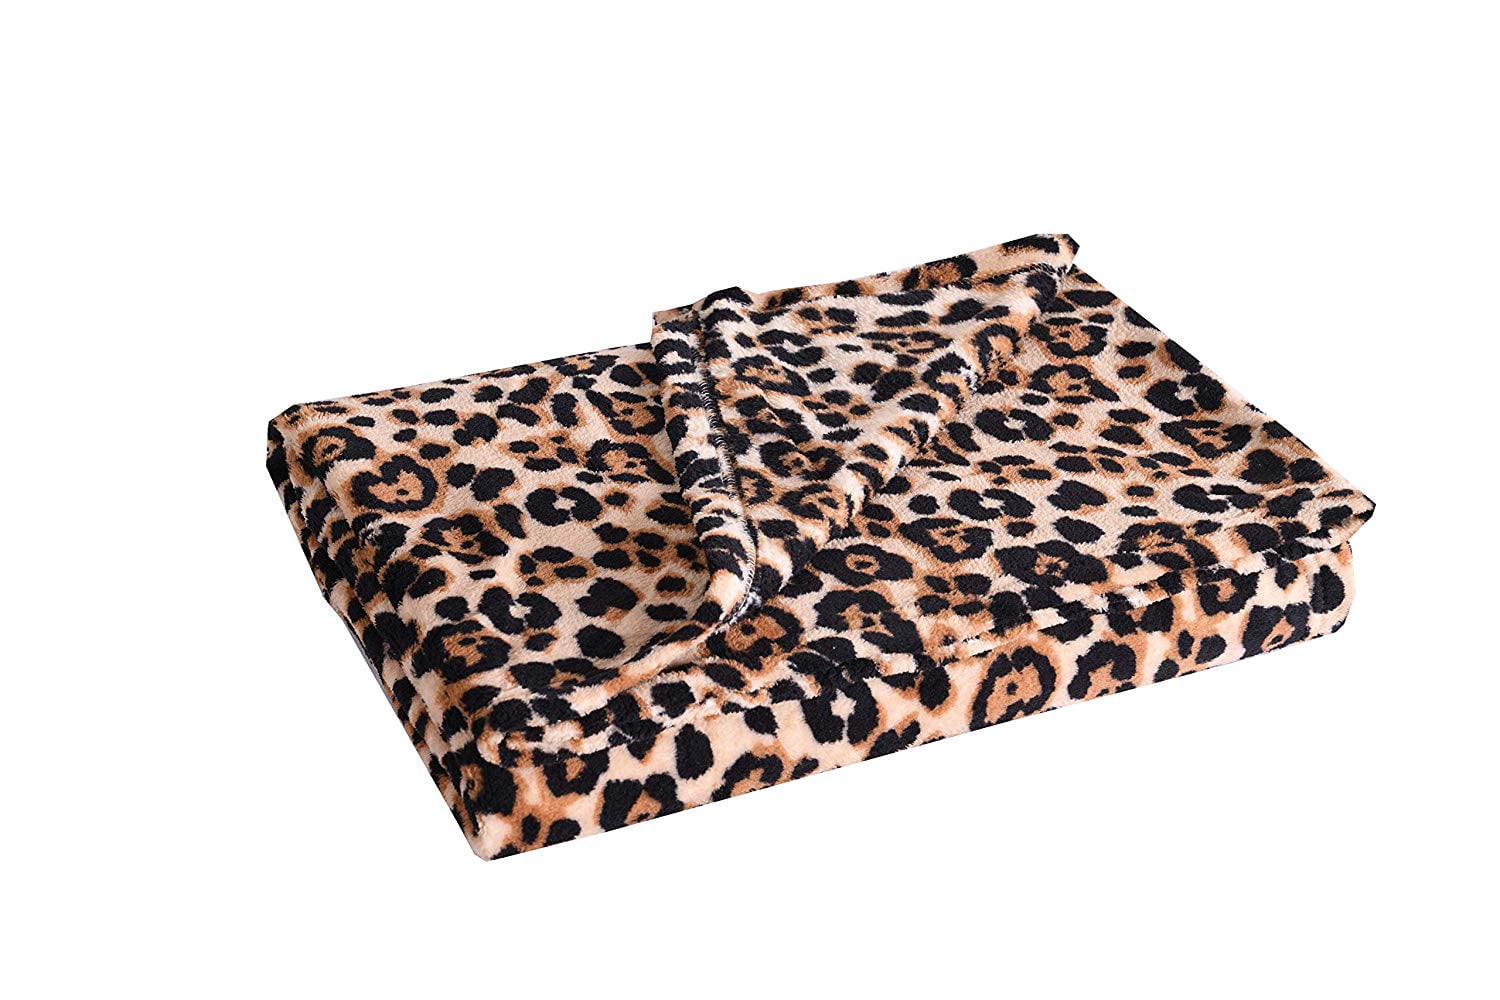 Colorful Animal Leopard Print Cozy All Season Throw Blanket for Bed Velvet Throw Blankets and Throws Soft Warm Cozy Cashmere Blanket Throw Soft Decorative 